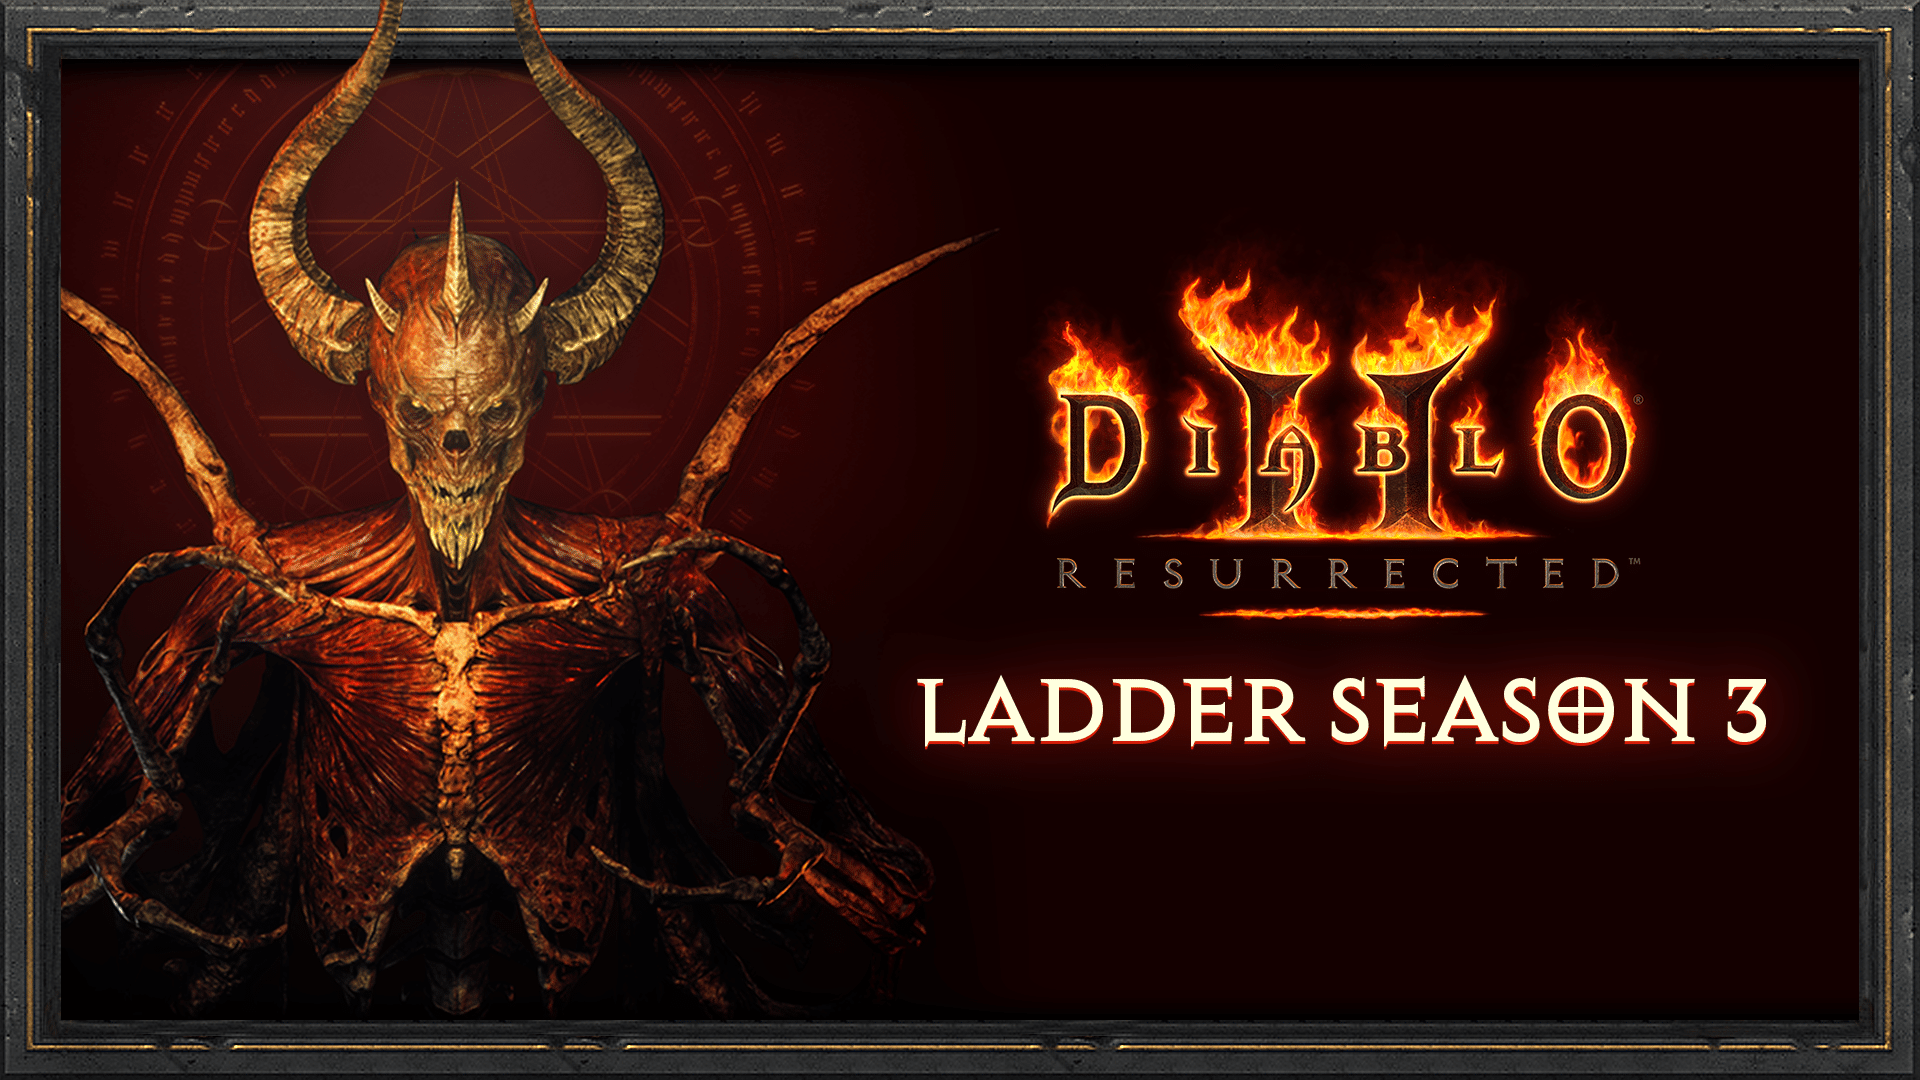 Diablo 2 Resurrected Update 1.24 Slices Out for 2.6 Ladder Season 3 This Feb. 15